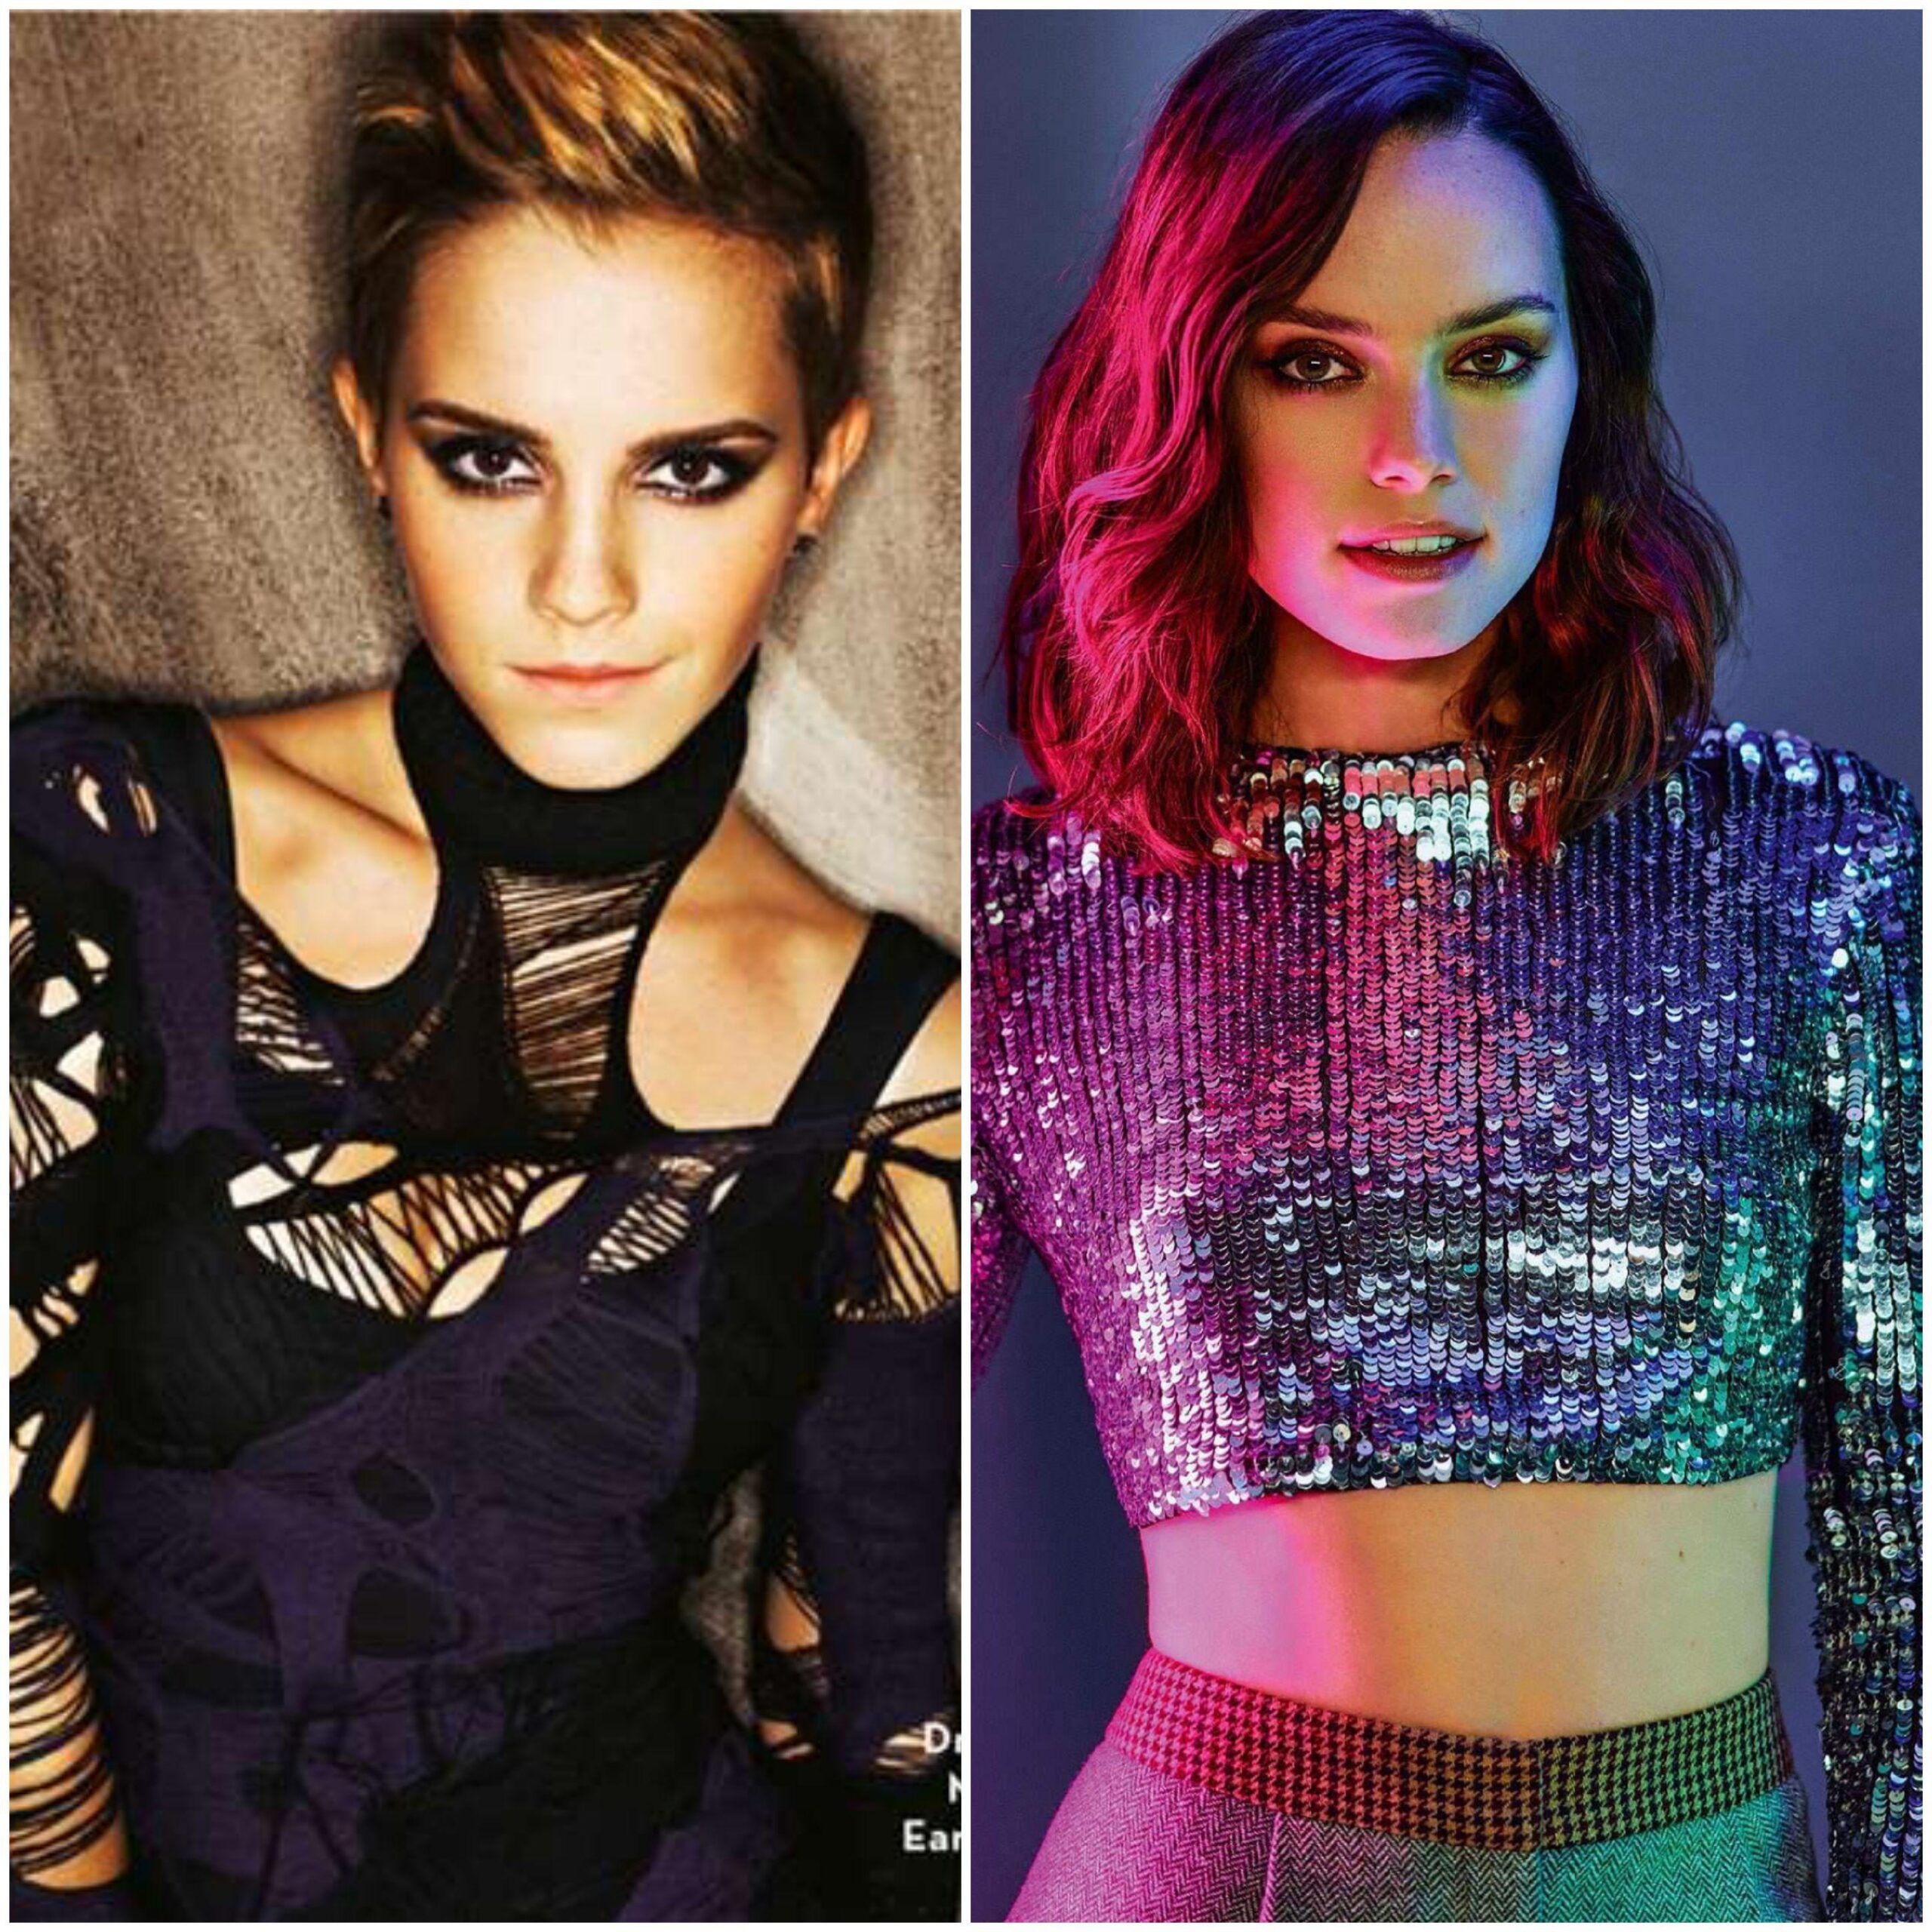 I want Emma Watson and Daisy Ridley to tie me